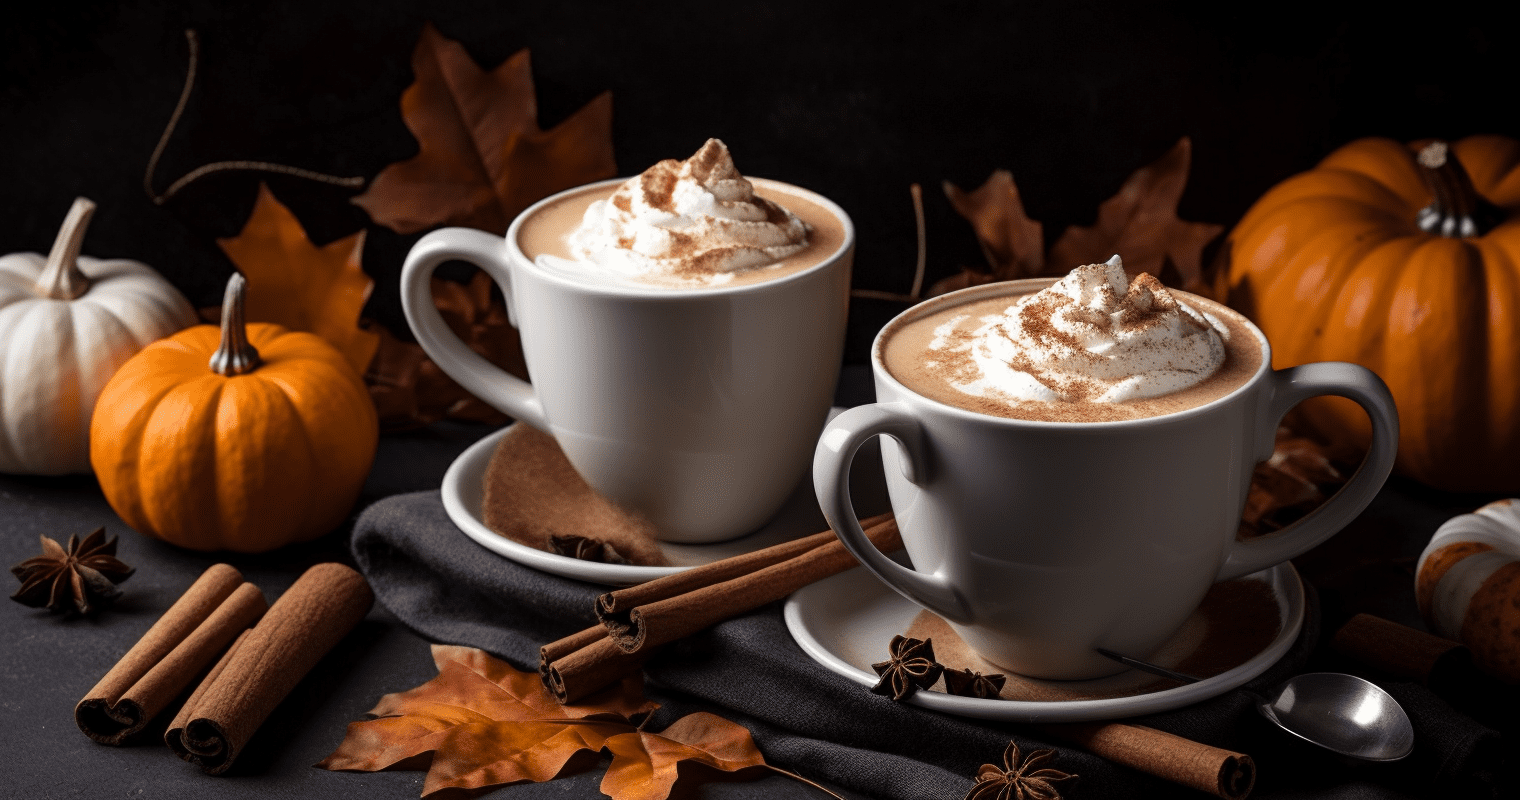 Fall in Love with This Homemade Pumpkin Spice Latte Recipe